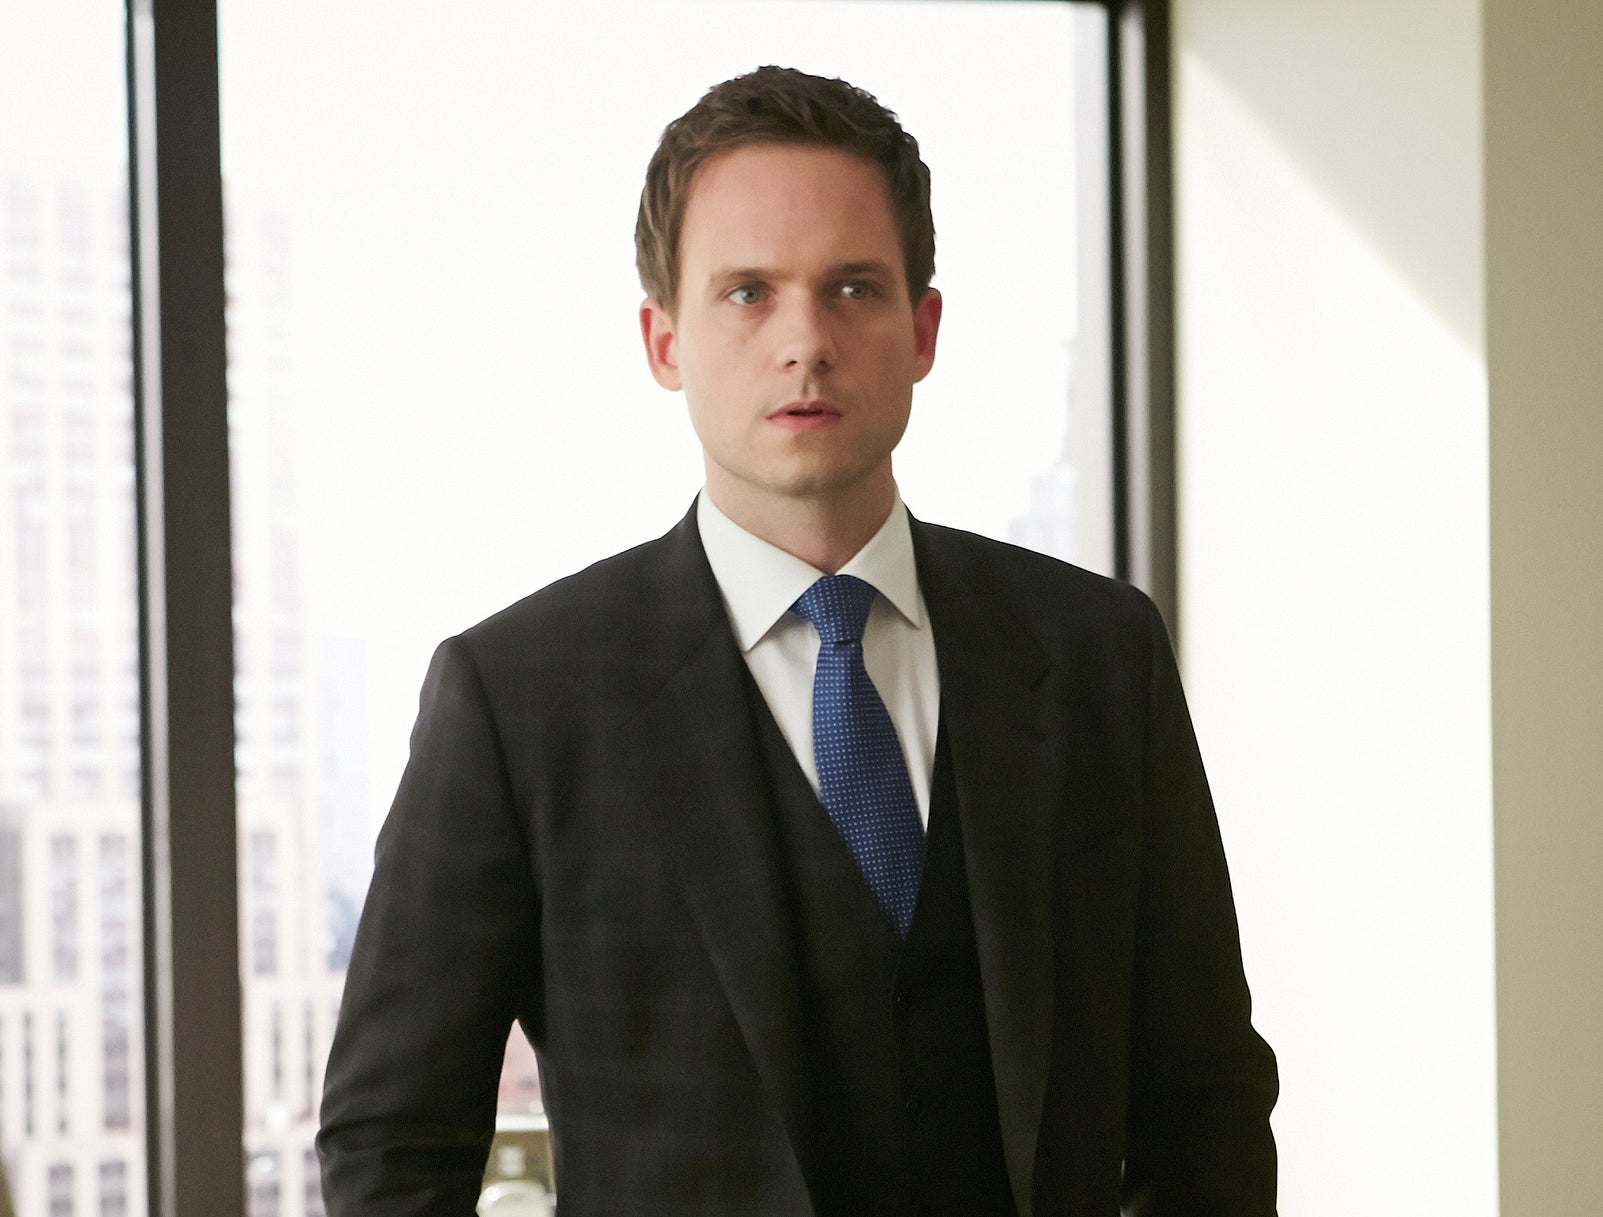 Patrick J. Adams as Mike Ross in &quot;Suits,&quot; wearing a tailored suit and tie, standing in an office setting